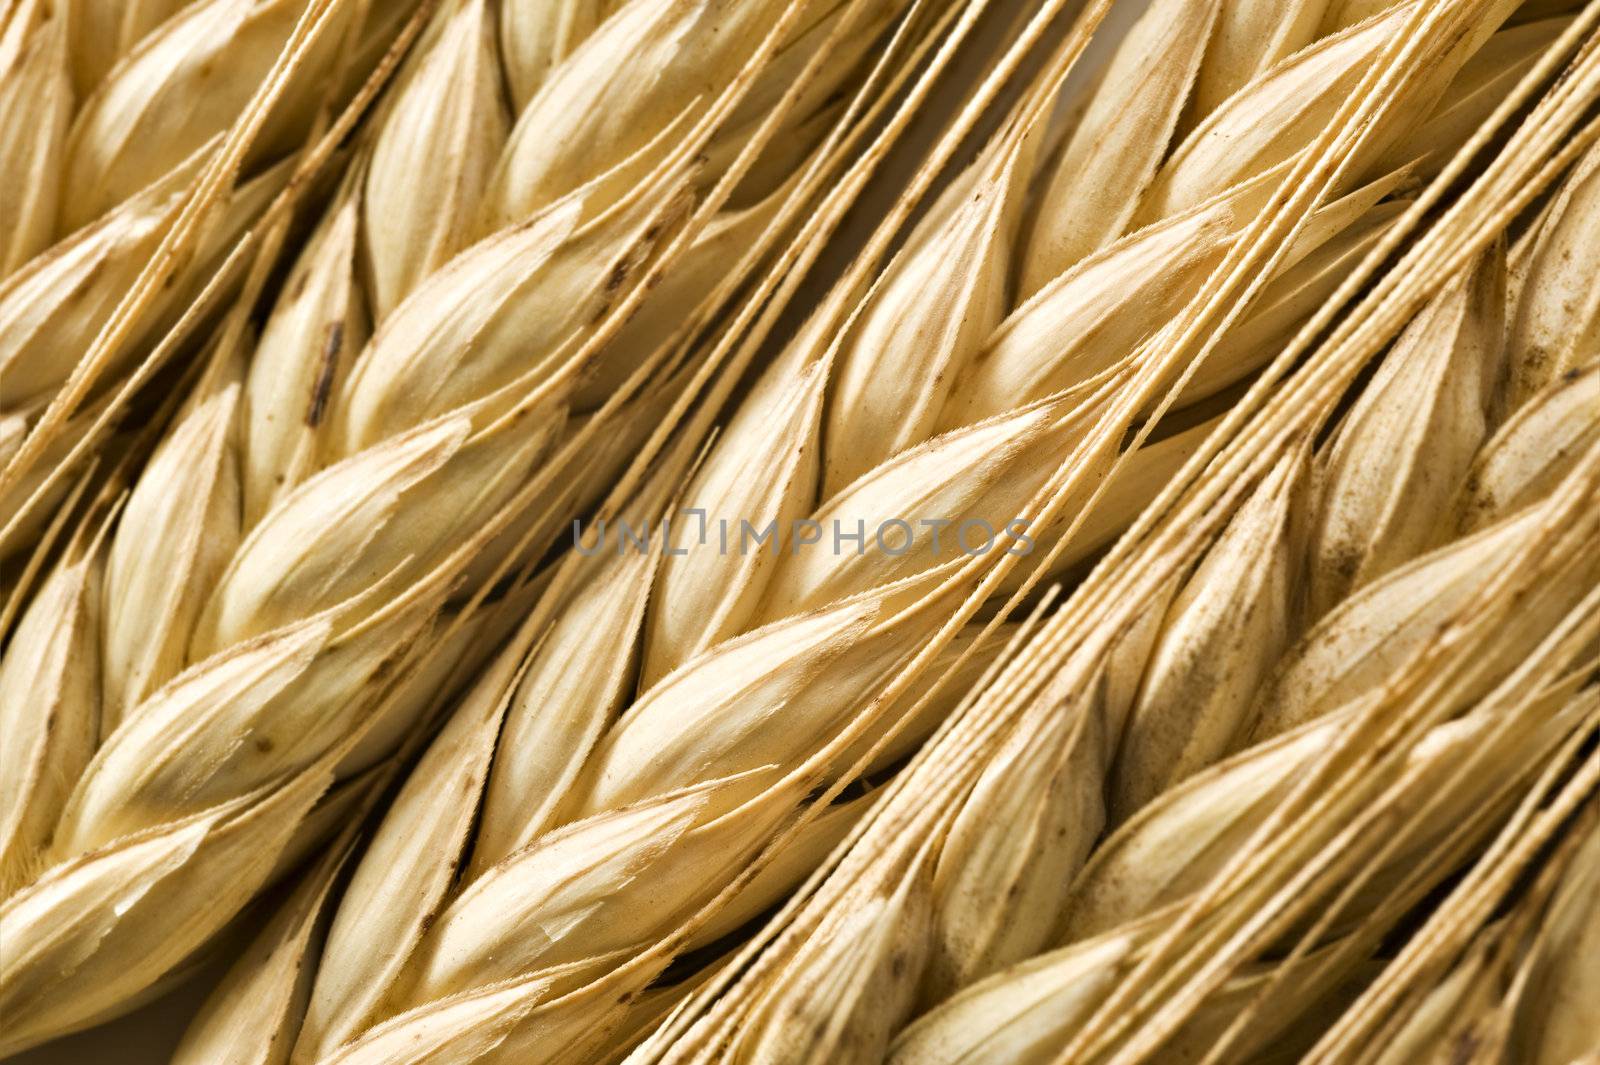 Background of ripe wheat ears by tish1